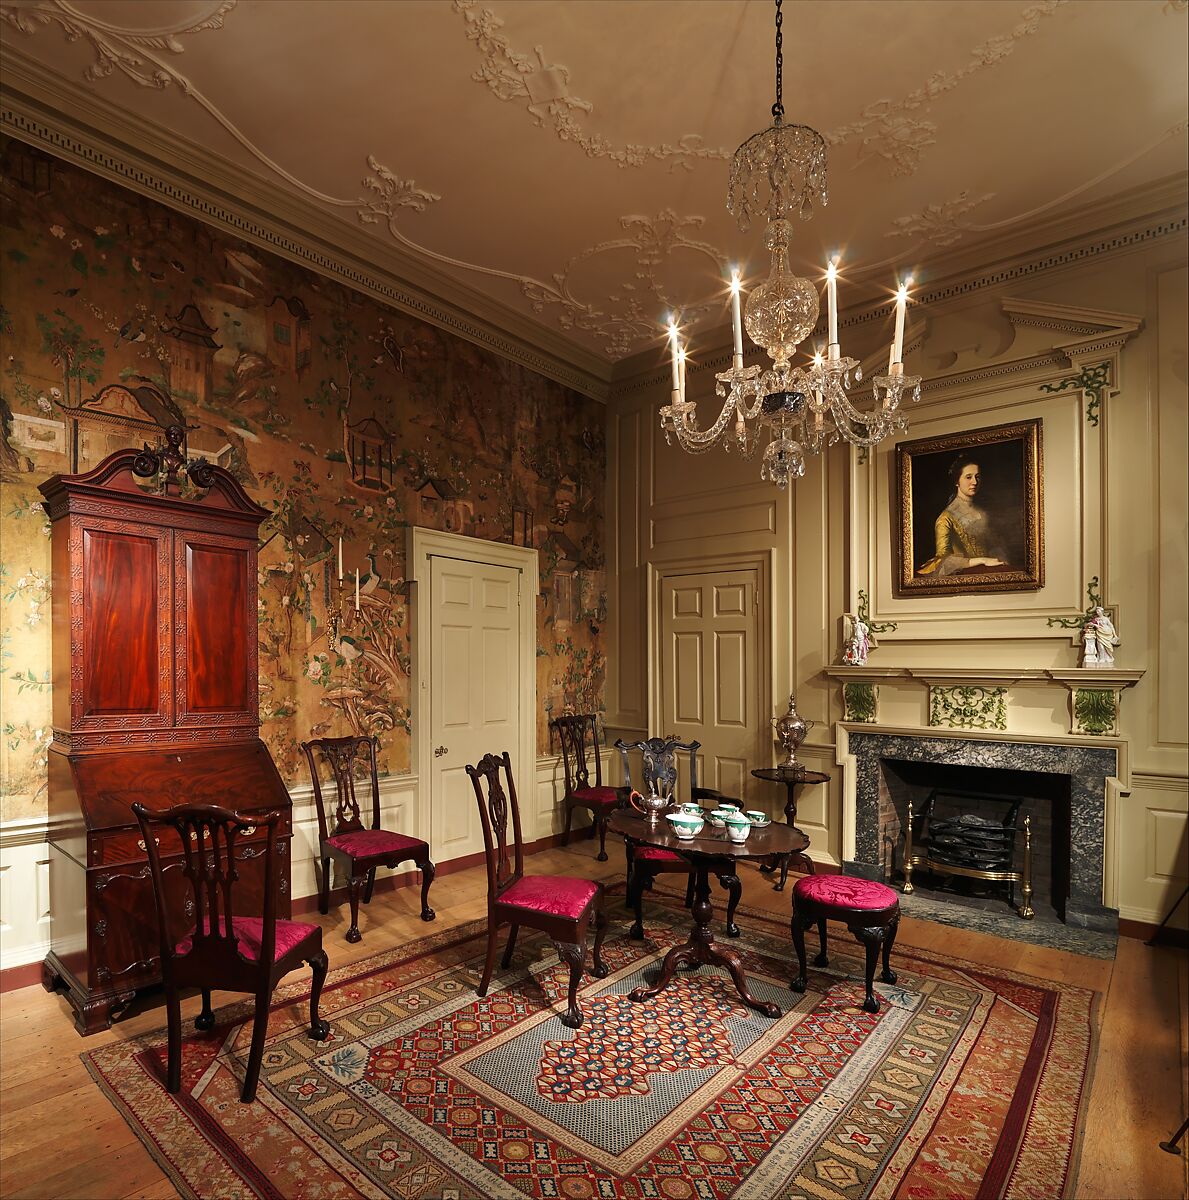 Room from the Powel House, Philadelphia, Wood and plaster, American 